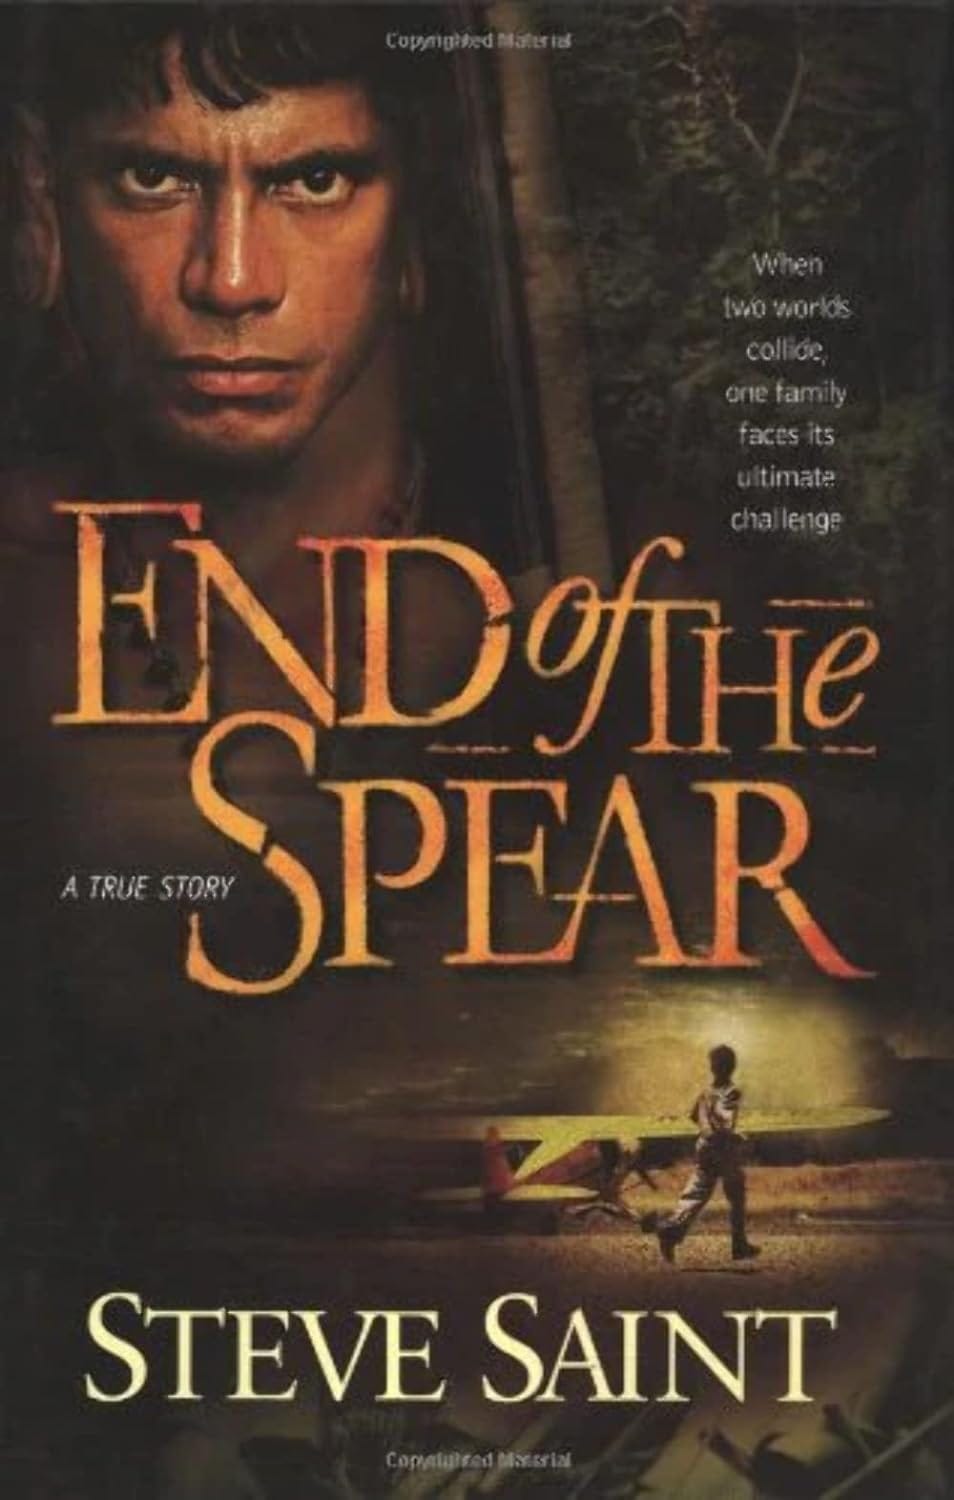 Image of book cover from End of the Spear by Steve Saint.